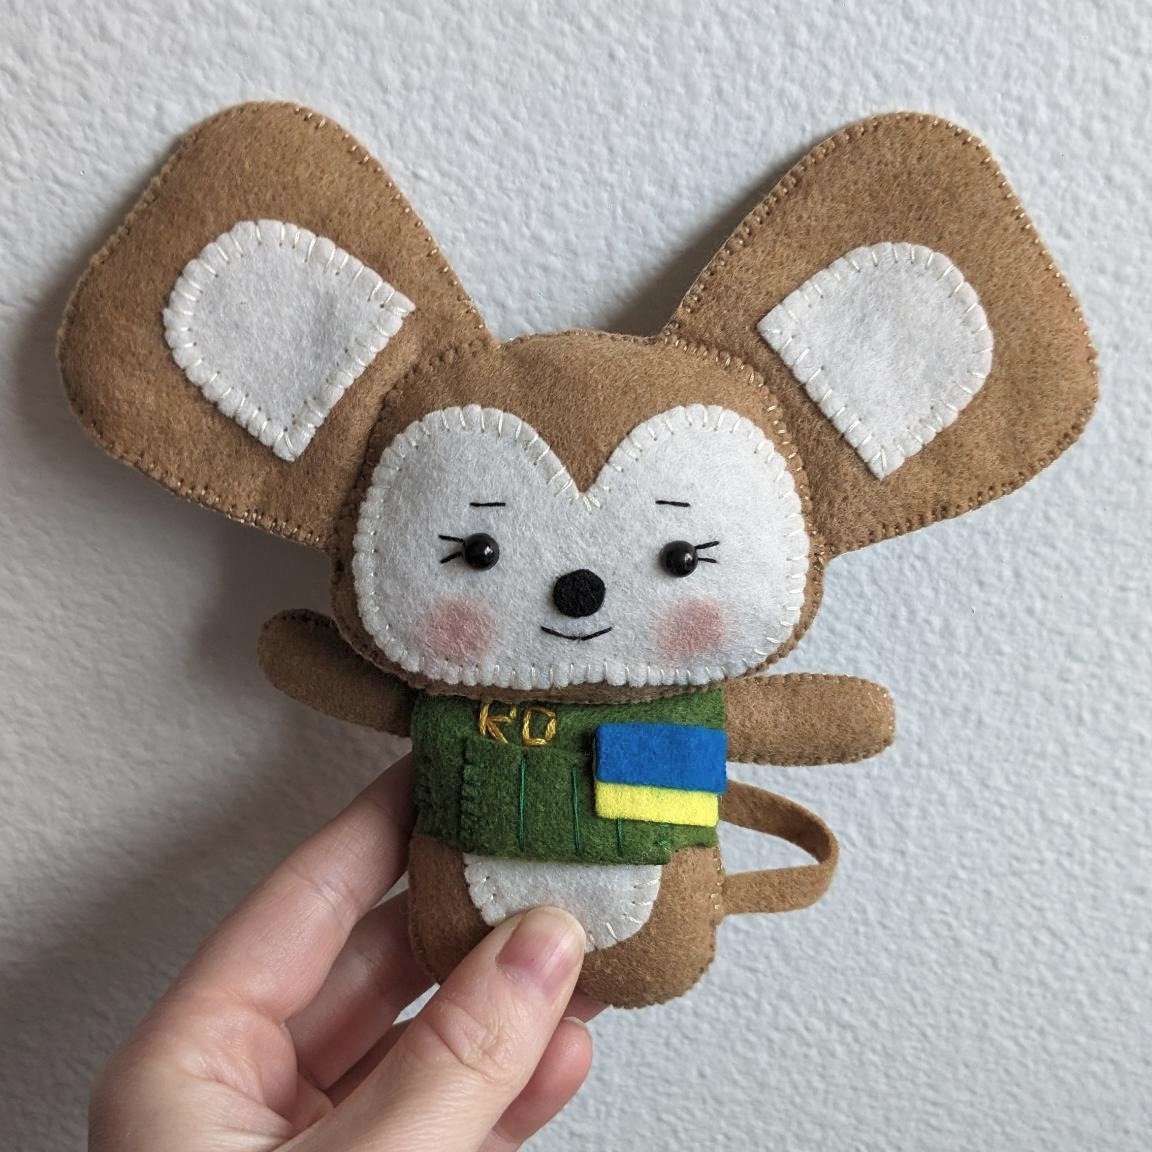 RAFFLE! - ends March 25 Win this 🇺🇦-made Rodent Division plushie to support SvoRa Animal Rescuers! This will be a Twitter & IG raffle - Each entry is $3. Post proof of donation to receive a #. Paypal: valeriagolovanova93@gmail.com Shipping paid by our own @Kezza51454253